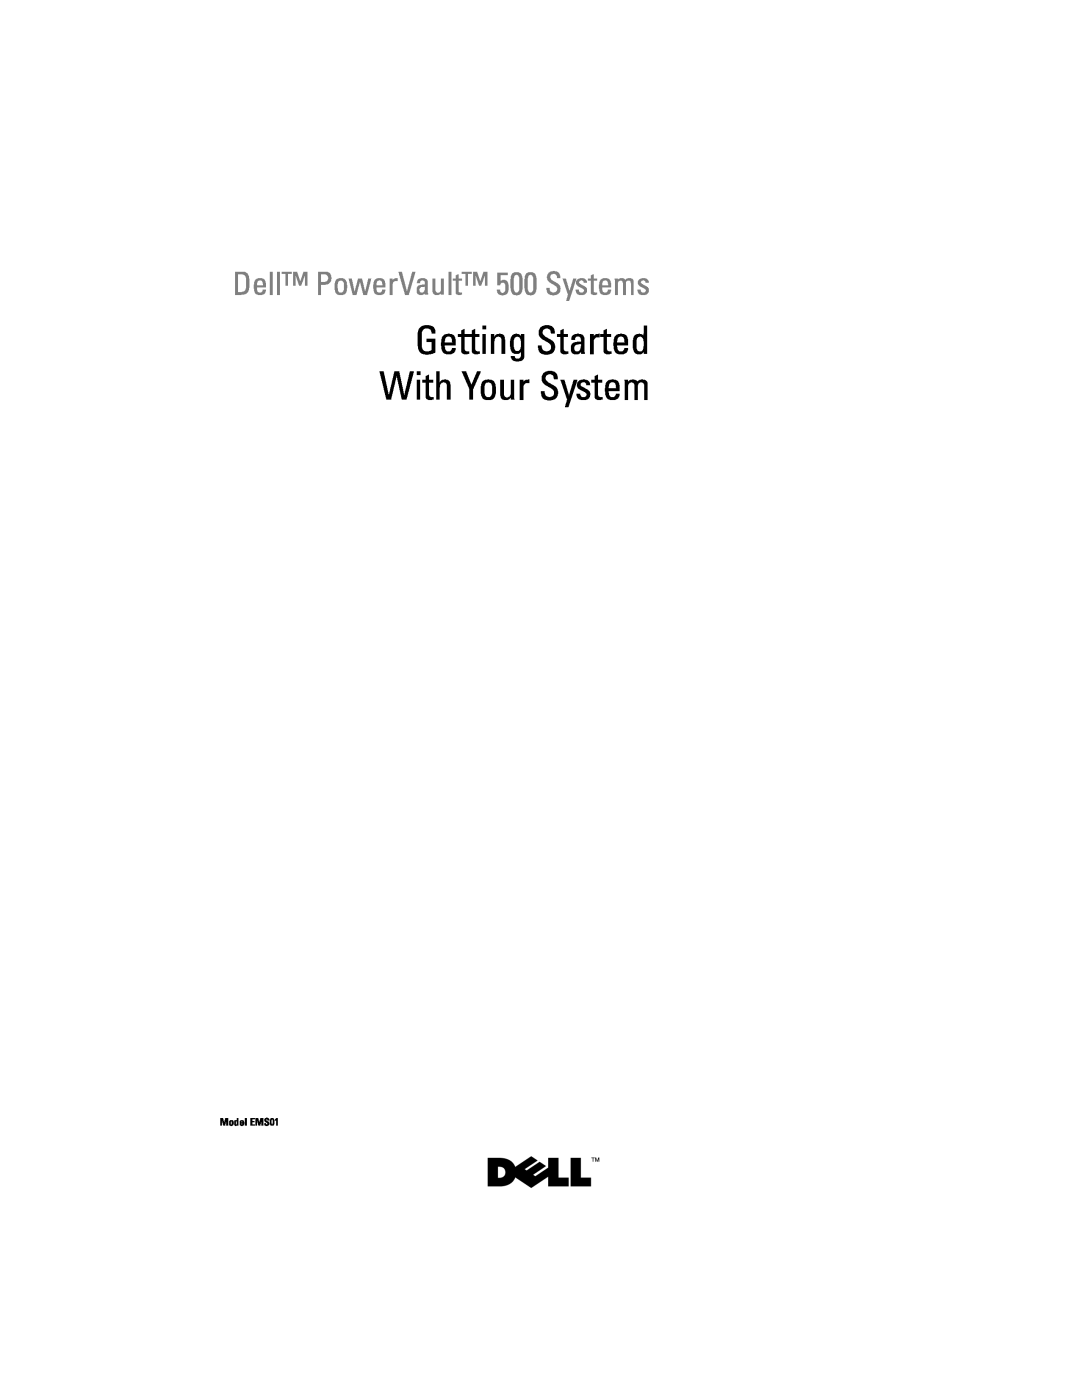 Dell YX154 manual Getting Started With Your System, Dell PowerVault 500 Systems, Model EMS01 